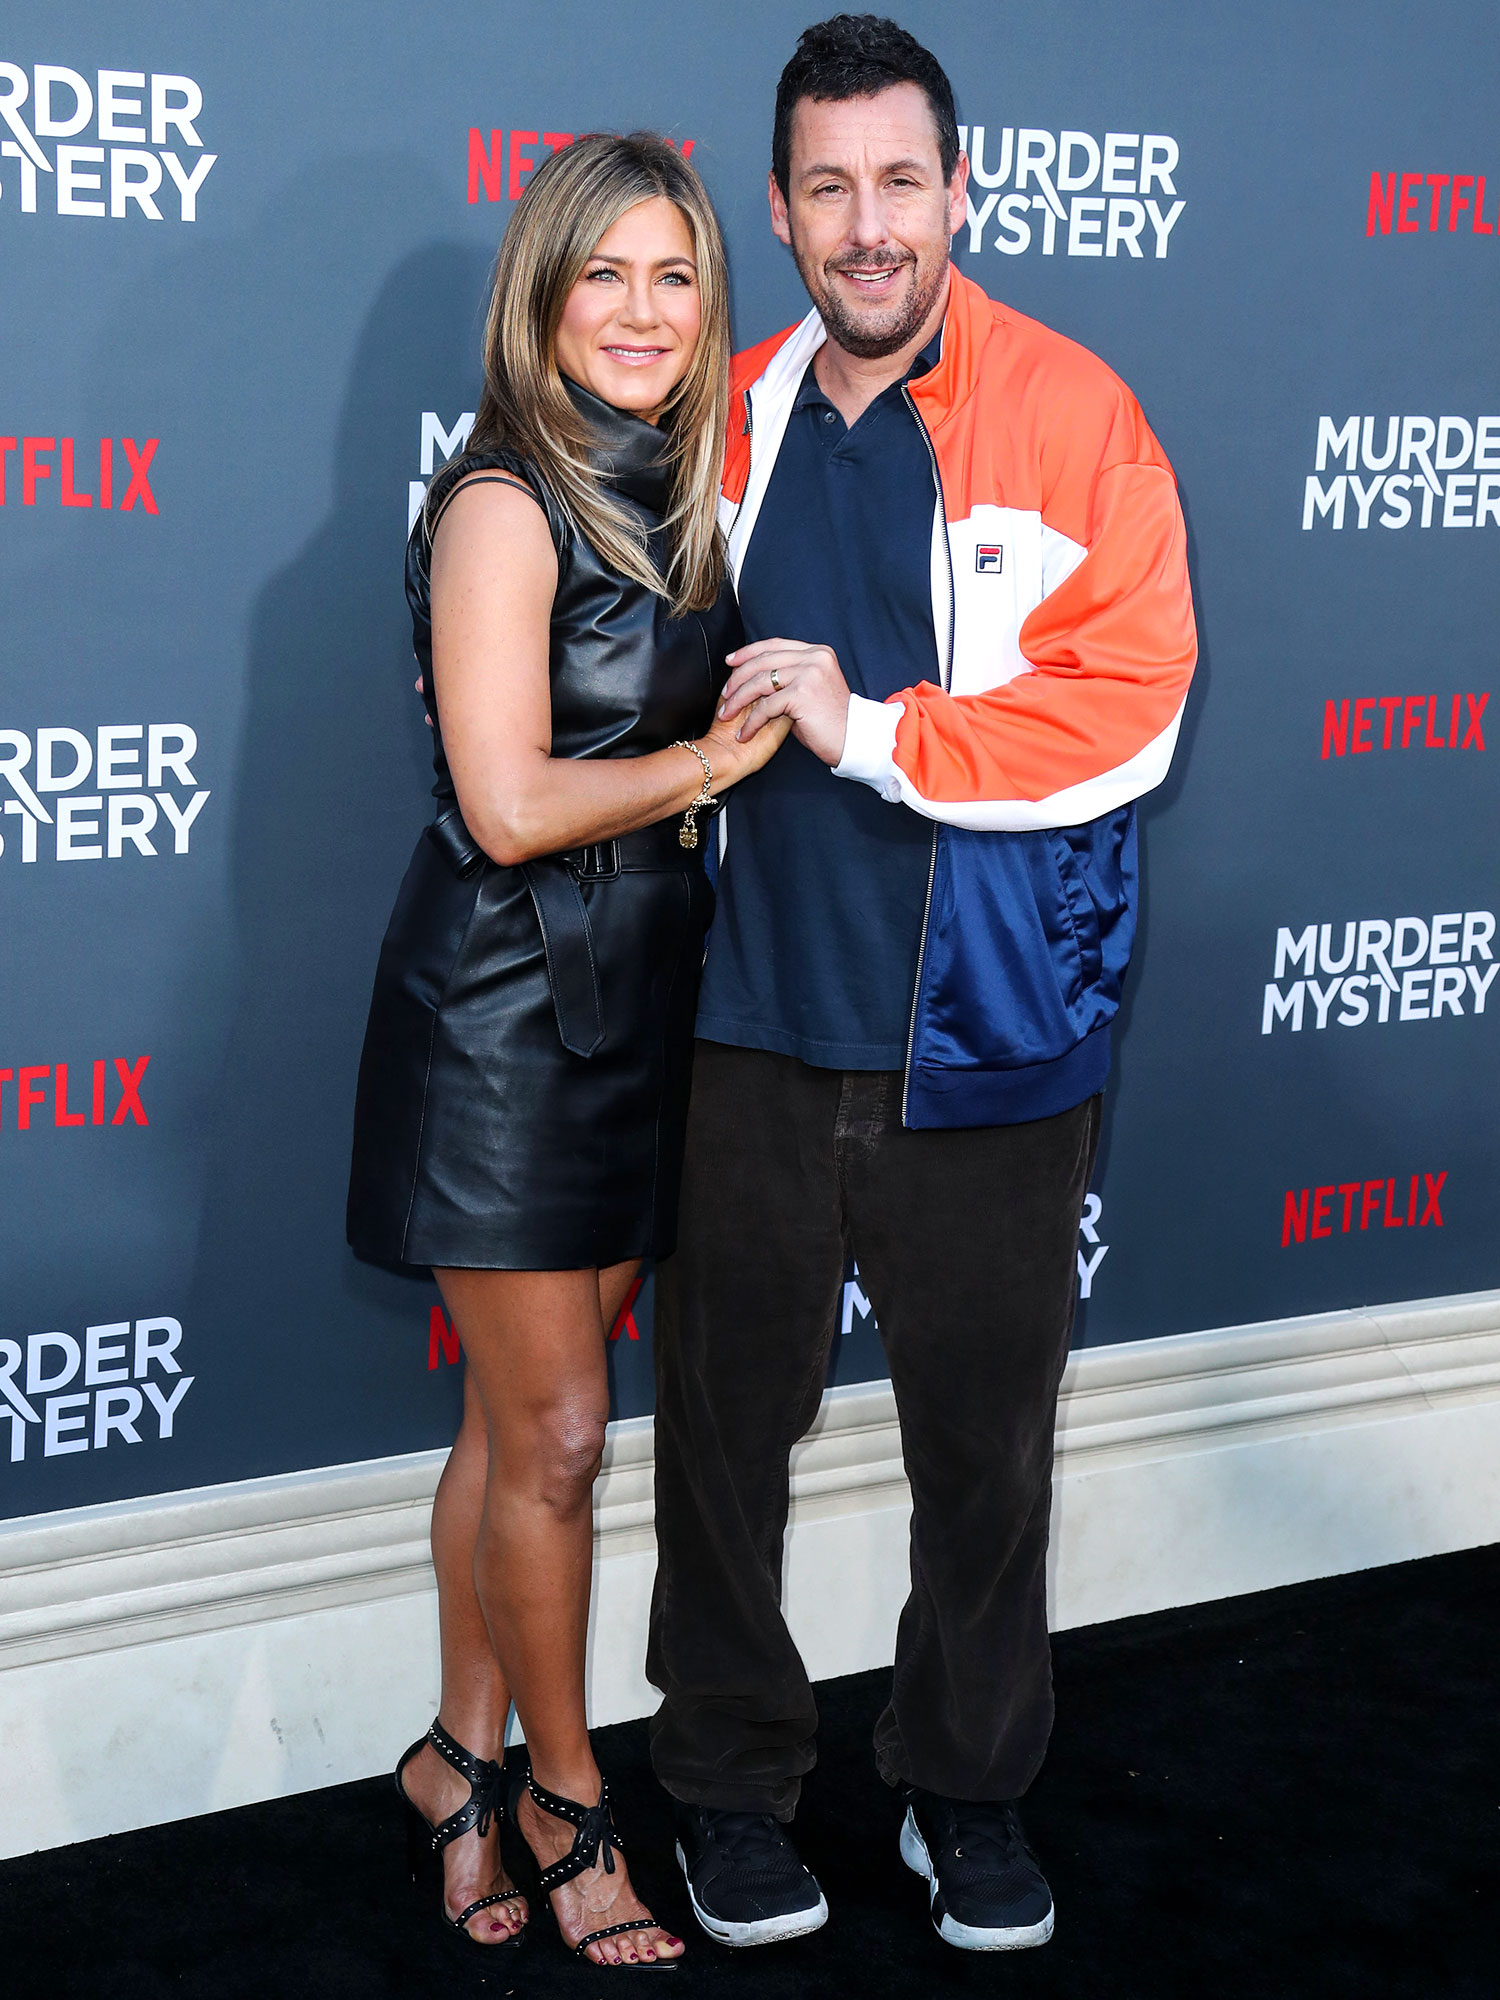 The Real Mystery of Jennifer Aniston and Adam Sandler's Netflix